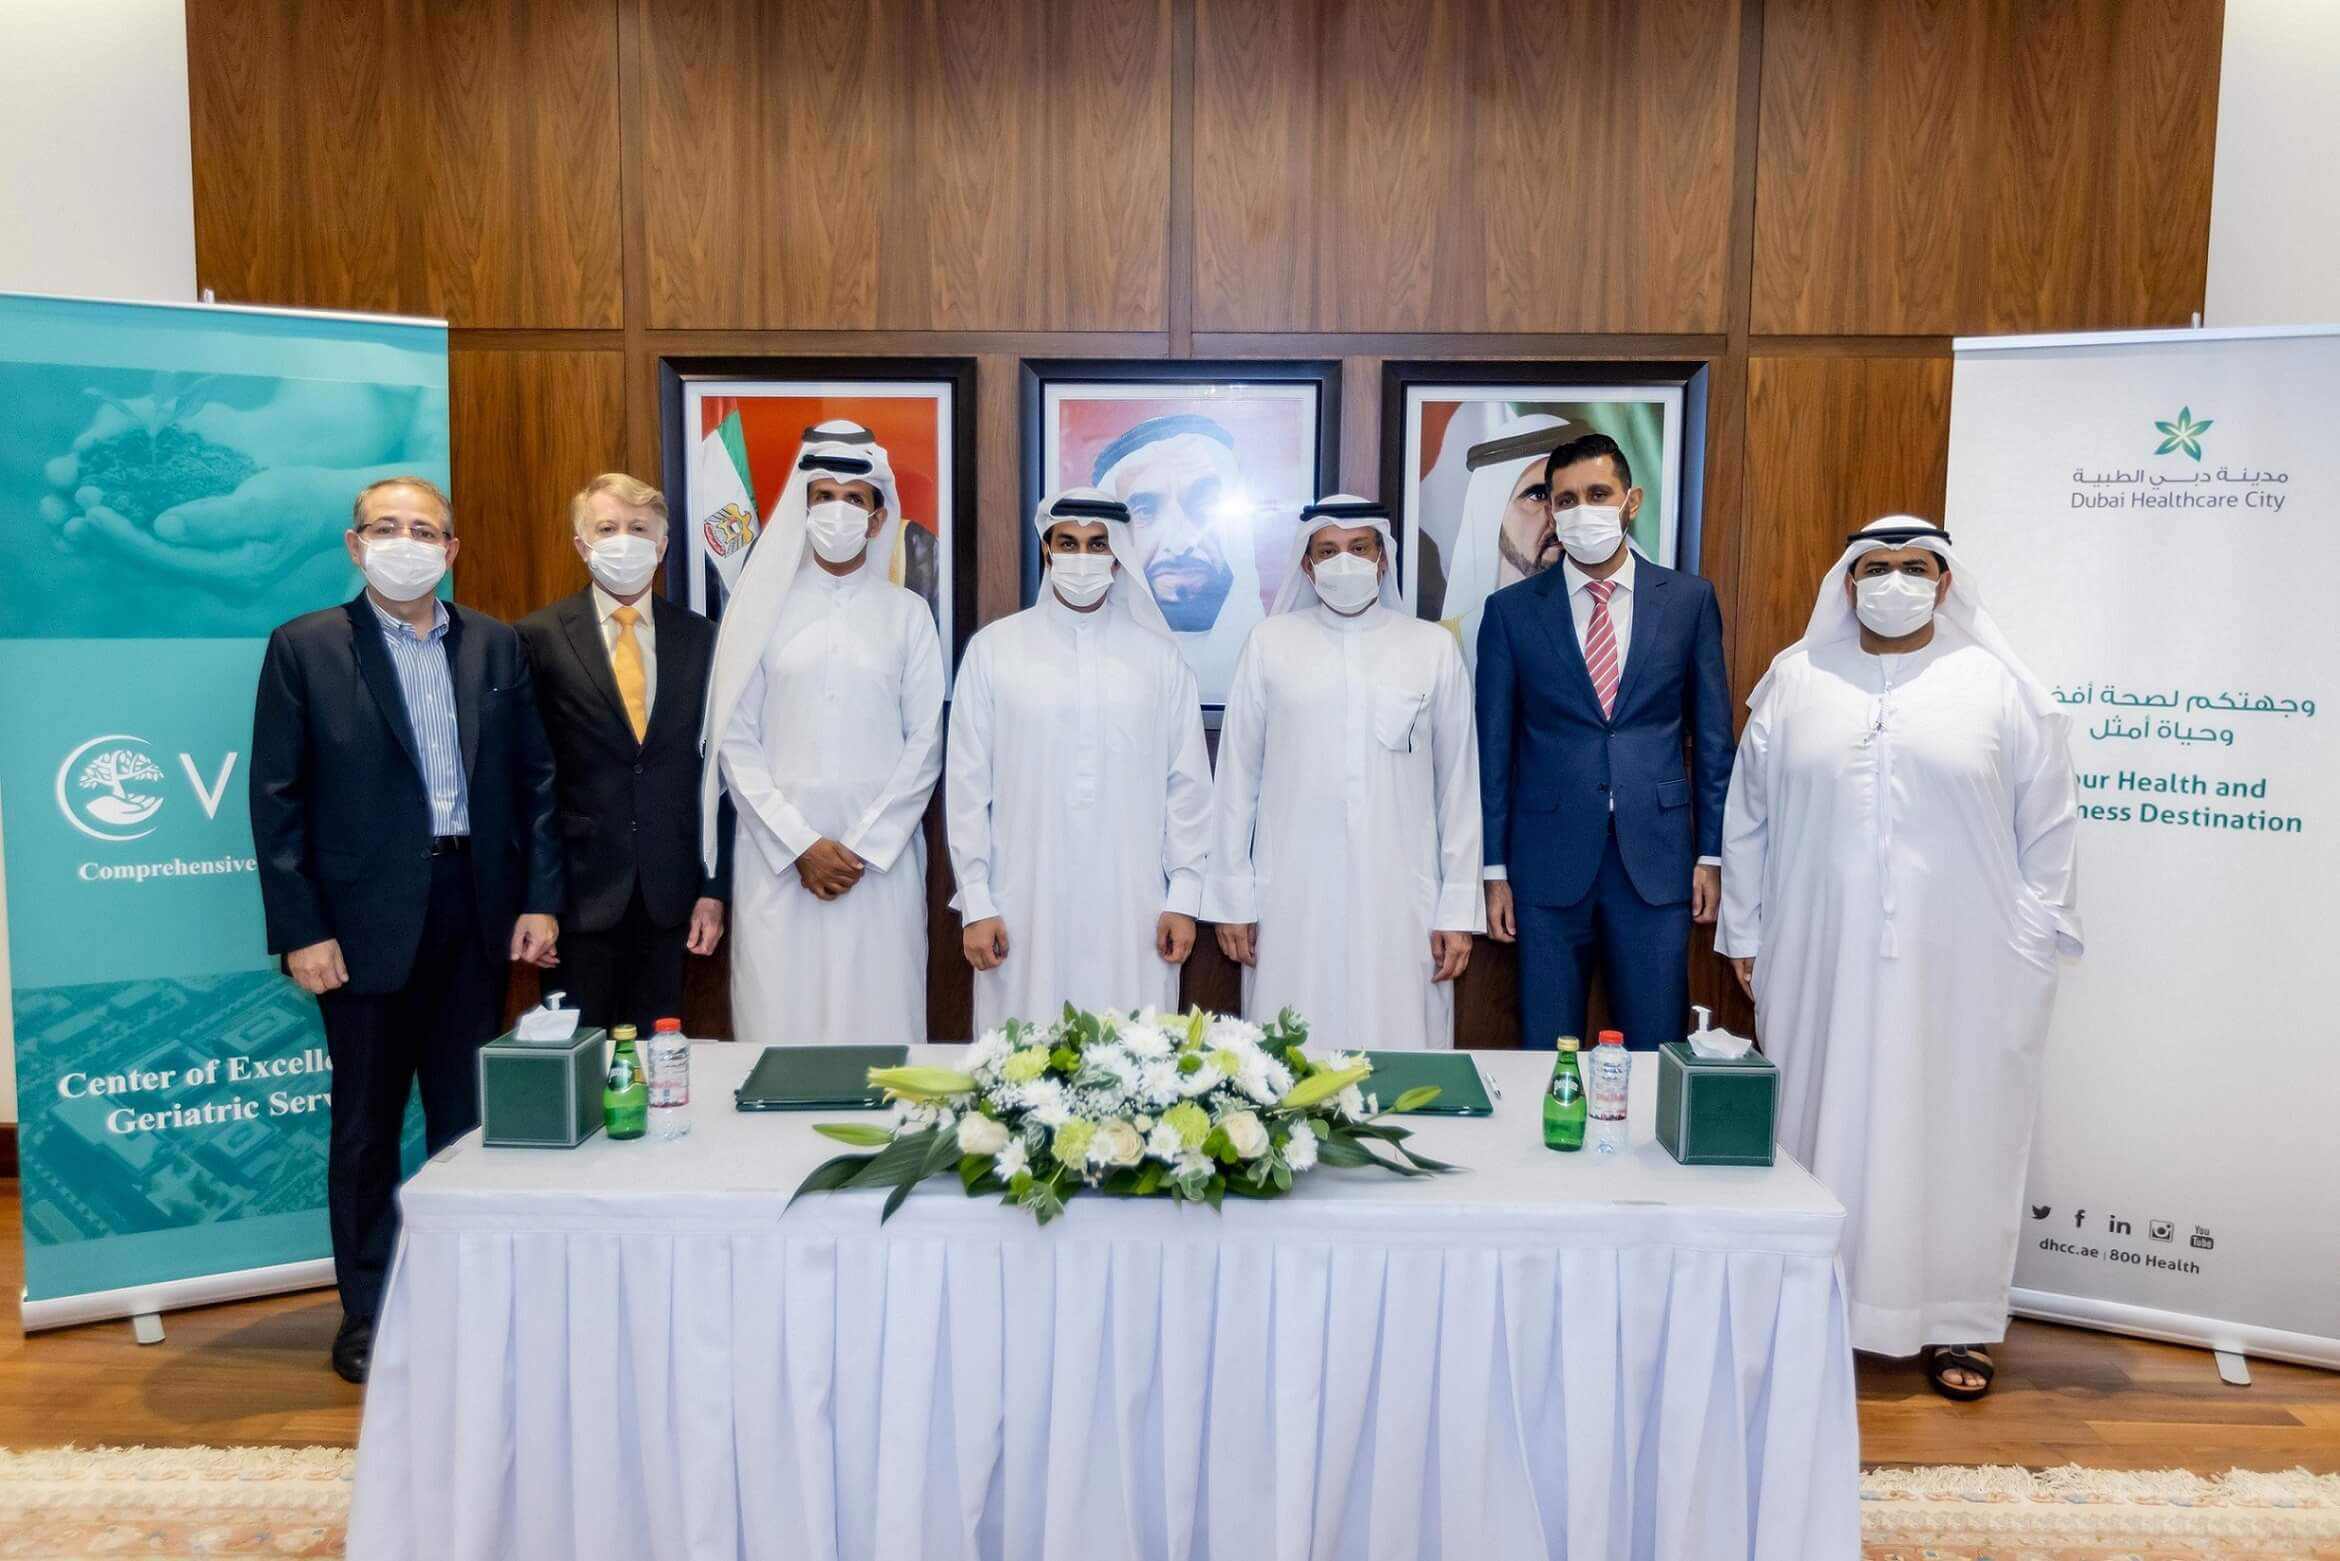 Dubai Healthcare City and VITA join forces to deliver the first specialised and integrated elderly care complex in the UAE